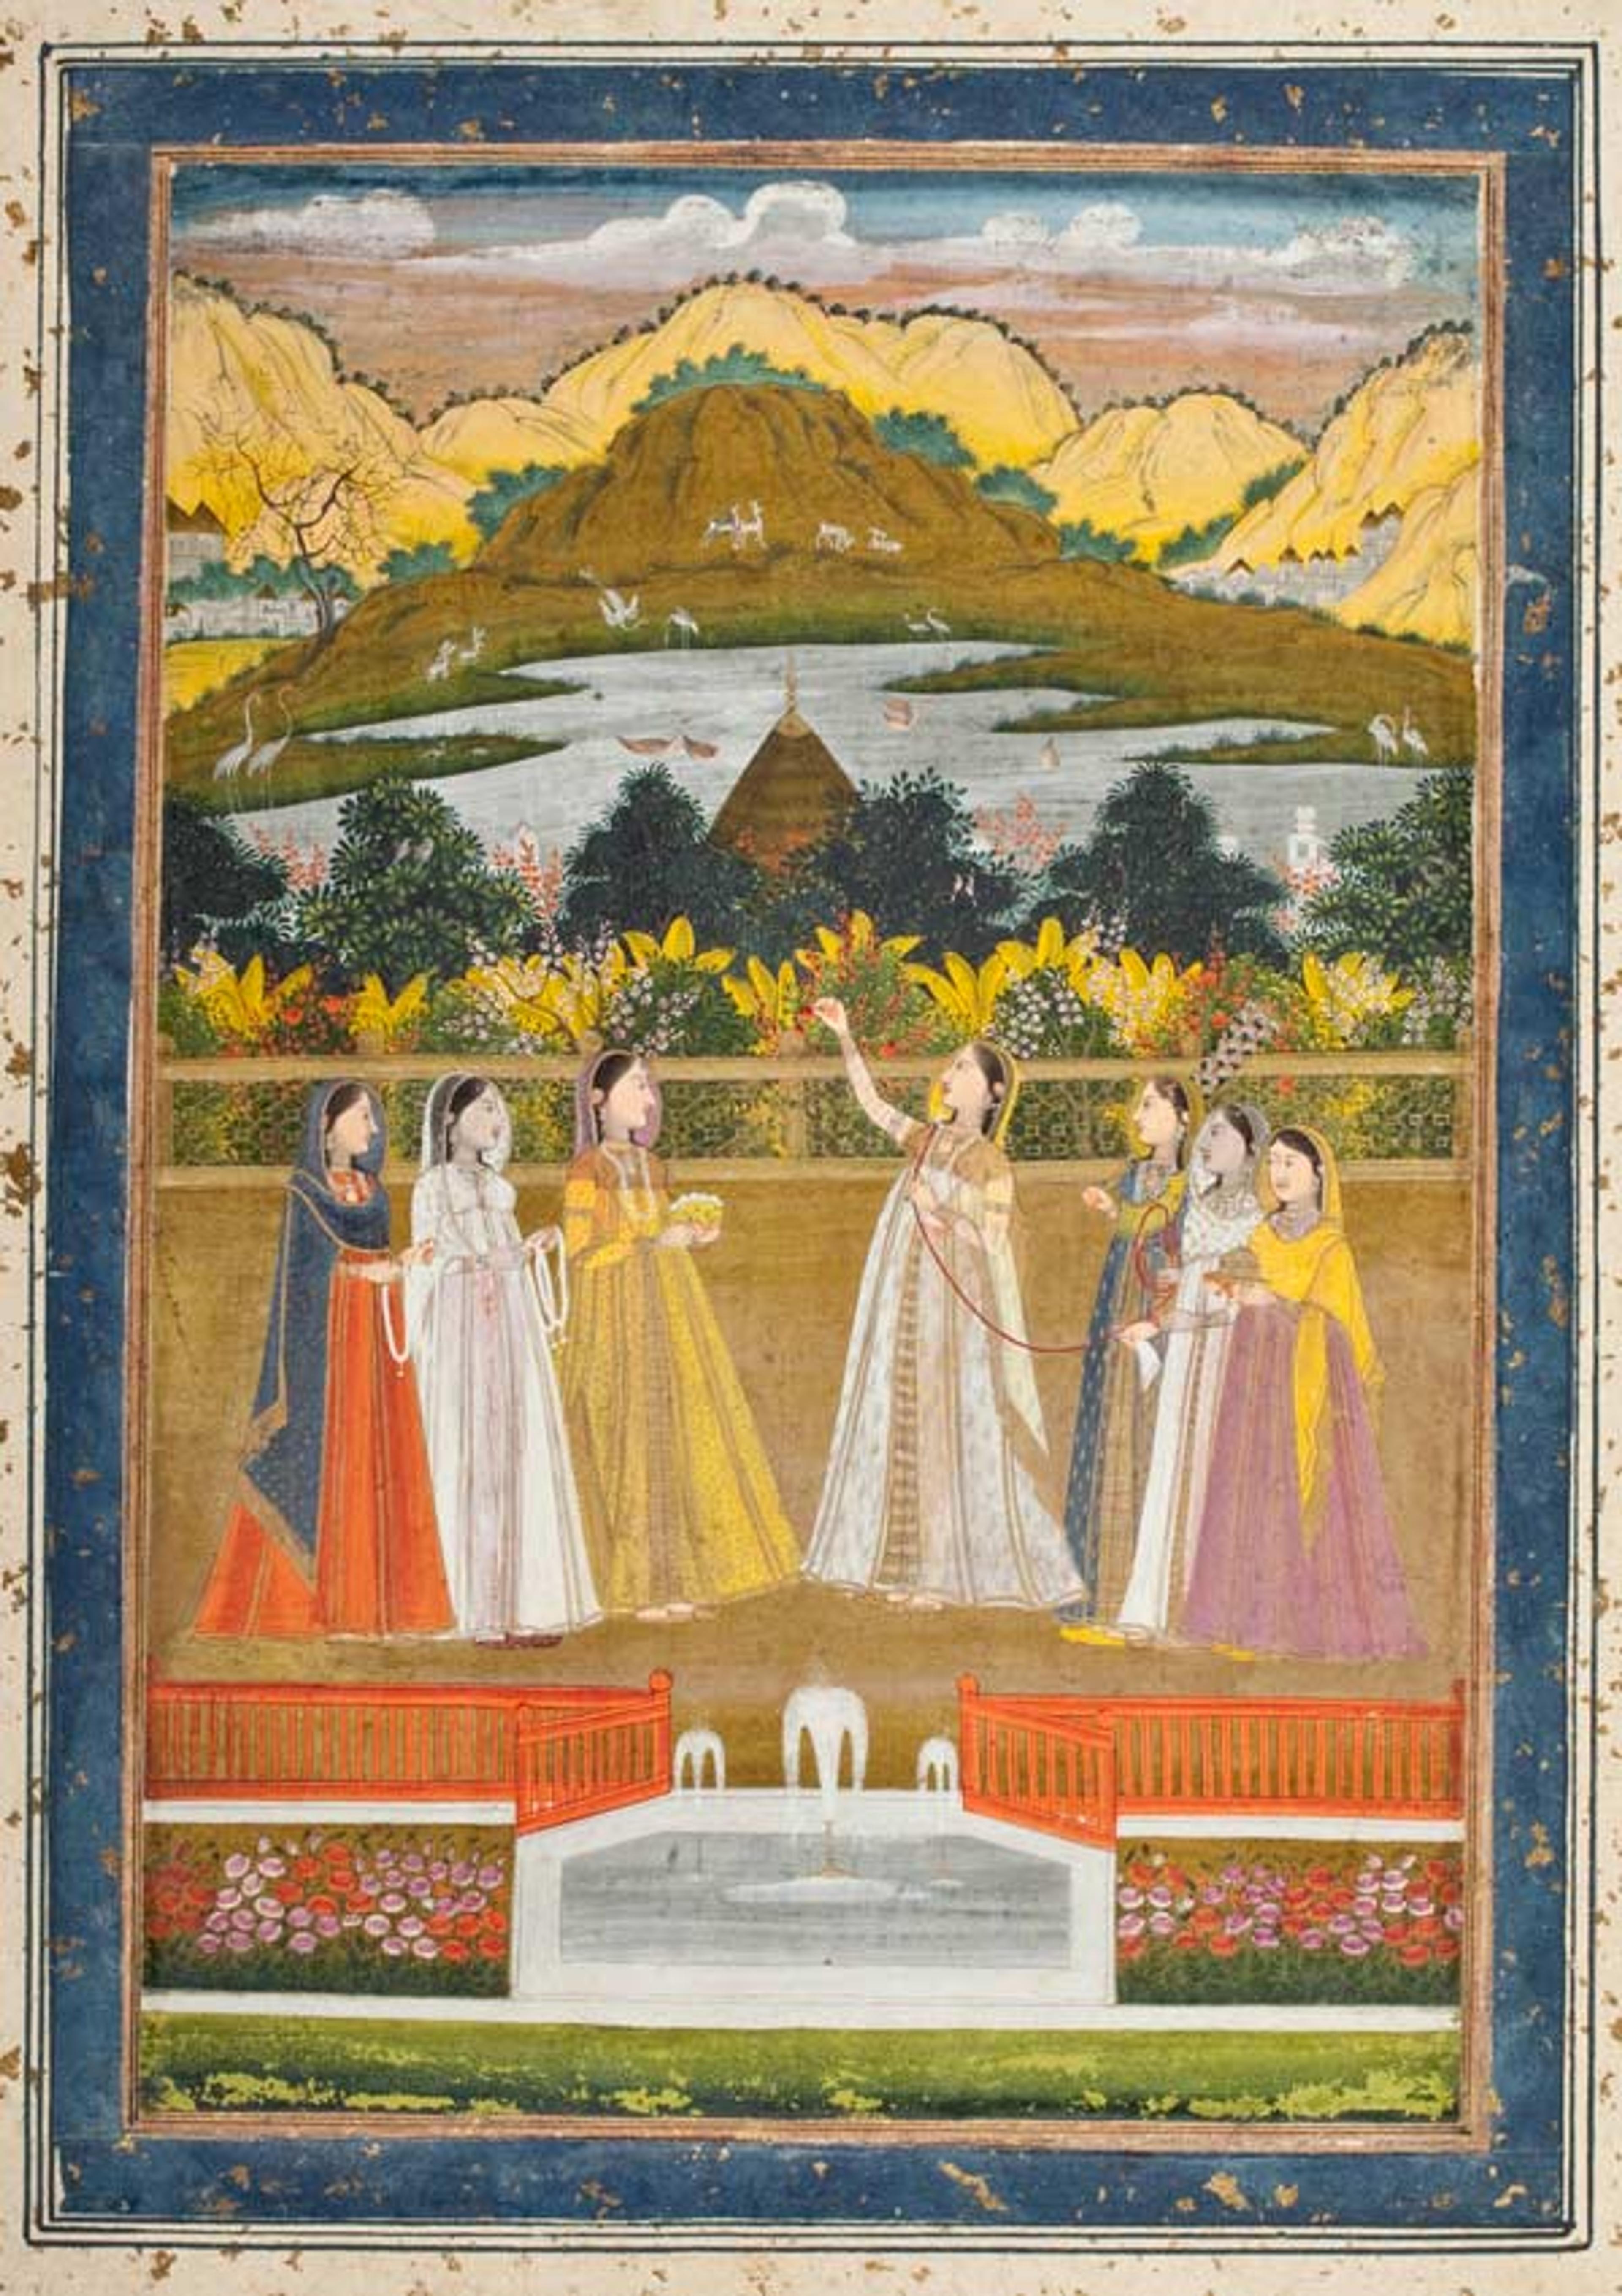 Attributed to Muhammad Faqirullah Khan (Indian, active circa 1720–1770). A Princess and Her Companions Enjoying a Terrace Ambiance, circa 1760–1770. India, Uttar Pradesh, Farrukhabad. Opaque watercolor and gold on paper; Image: 11 x 7 1/2 in. (27.94 x 19.05 cm); Sheet: 16 1/8 x 11 3/4 in. (40.96 x 29.85 cm); Mat: 27 3/4 x 21 3/4 in. (70.49 x 55.25 cm). Los Angeles County Museum of Art, Los Angeles, Art Museum Council Fund (M.2005.159)